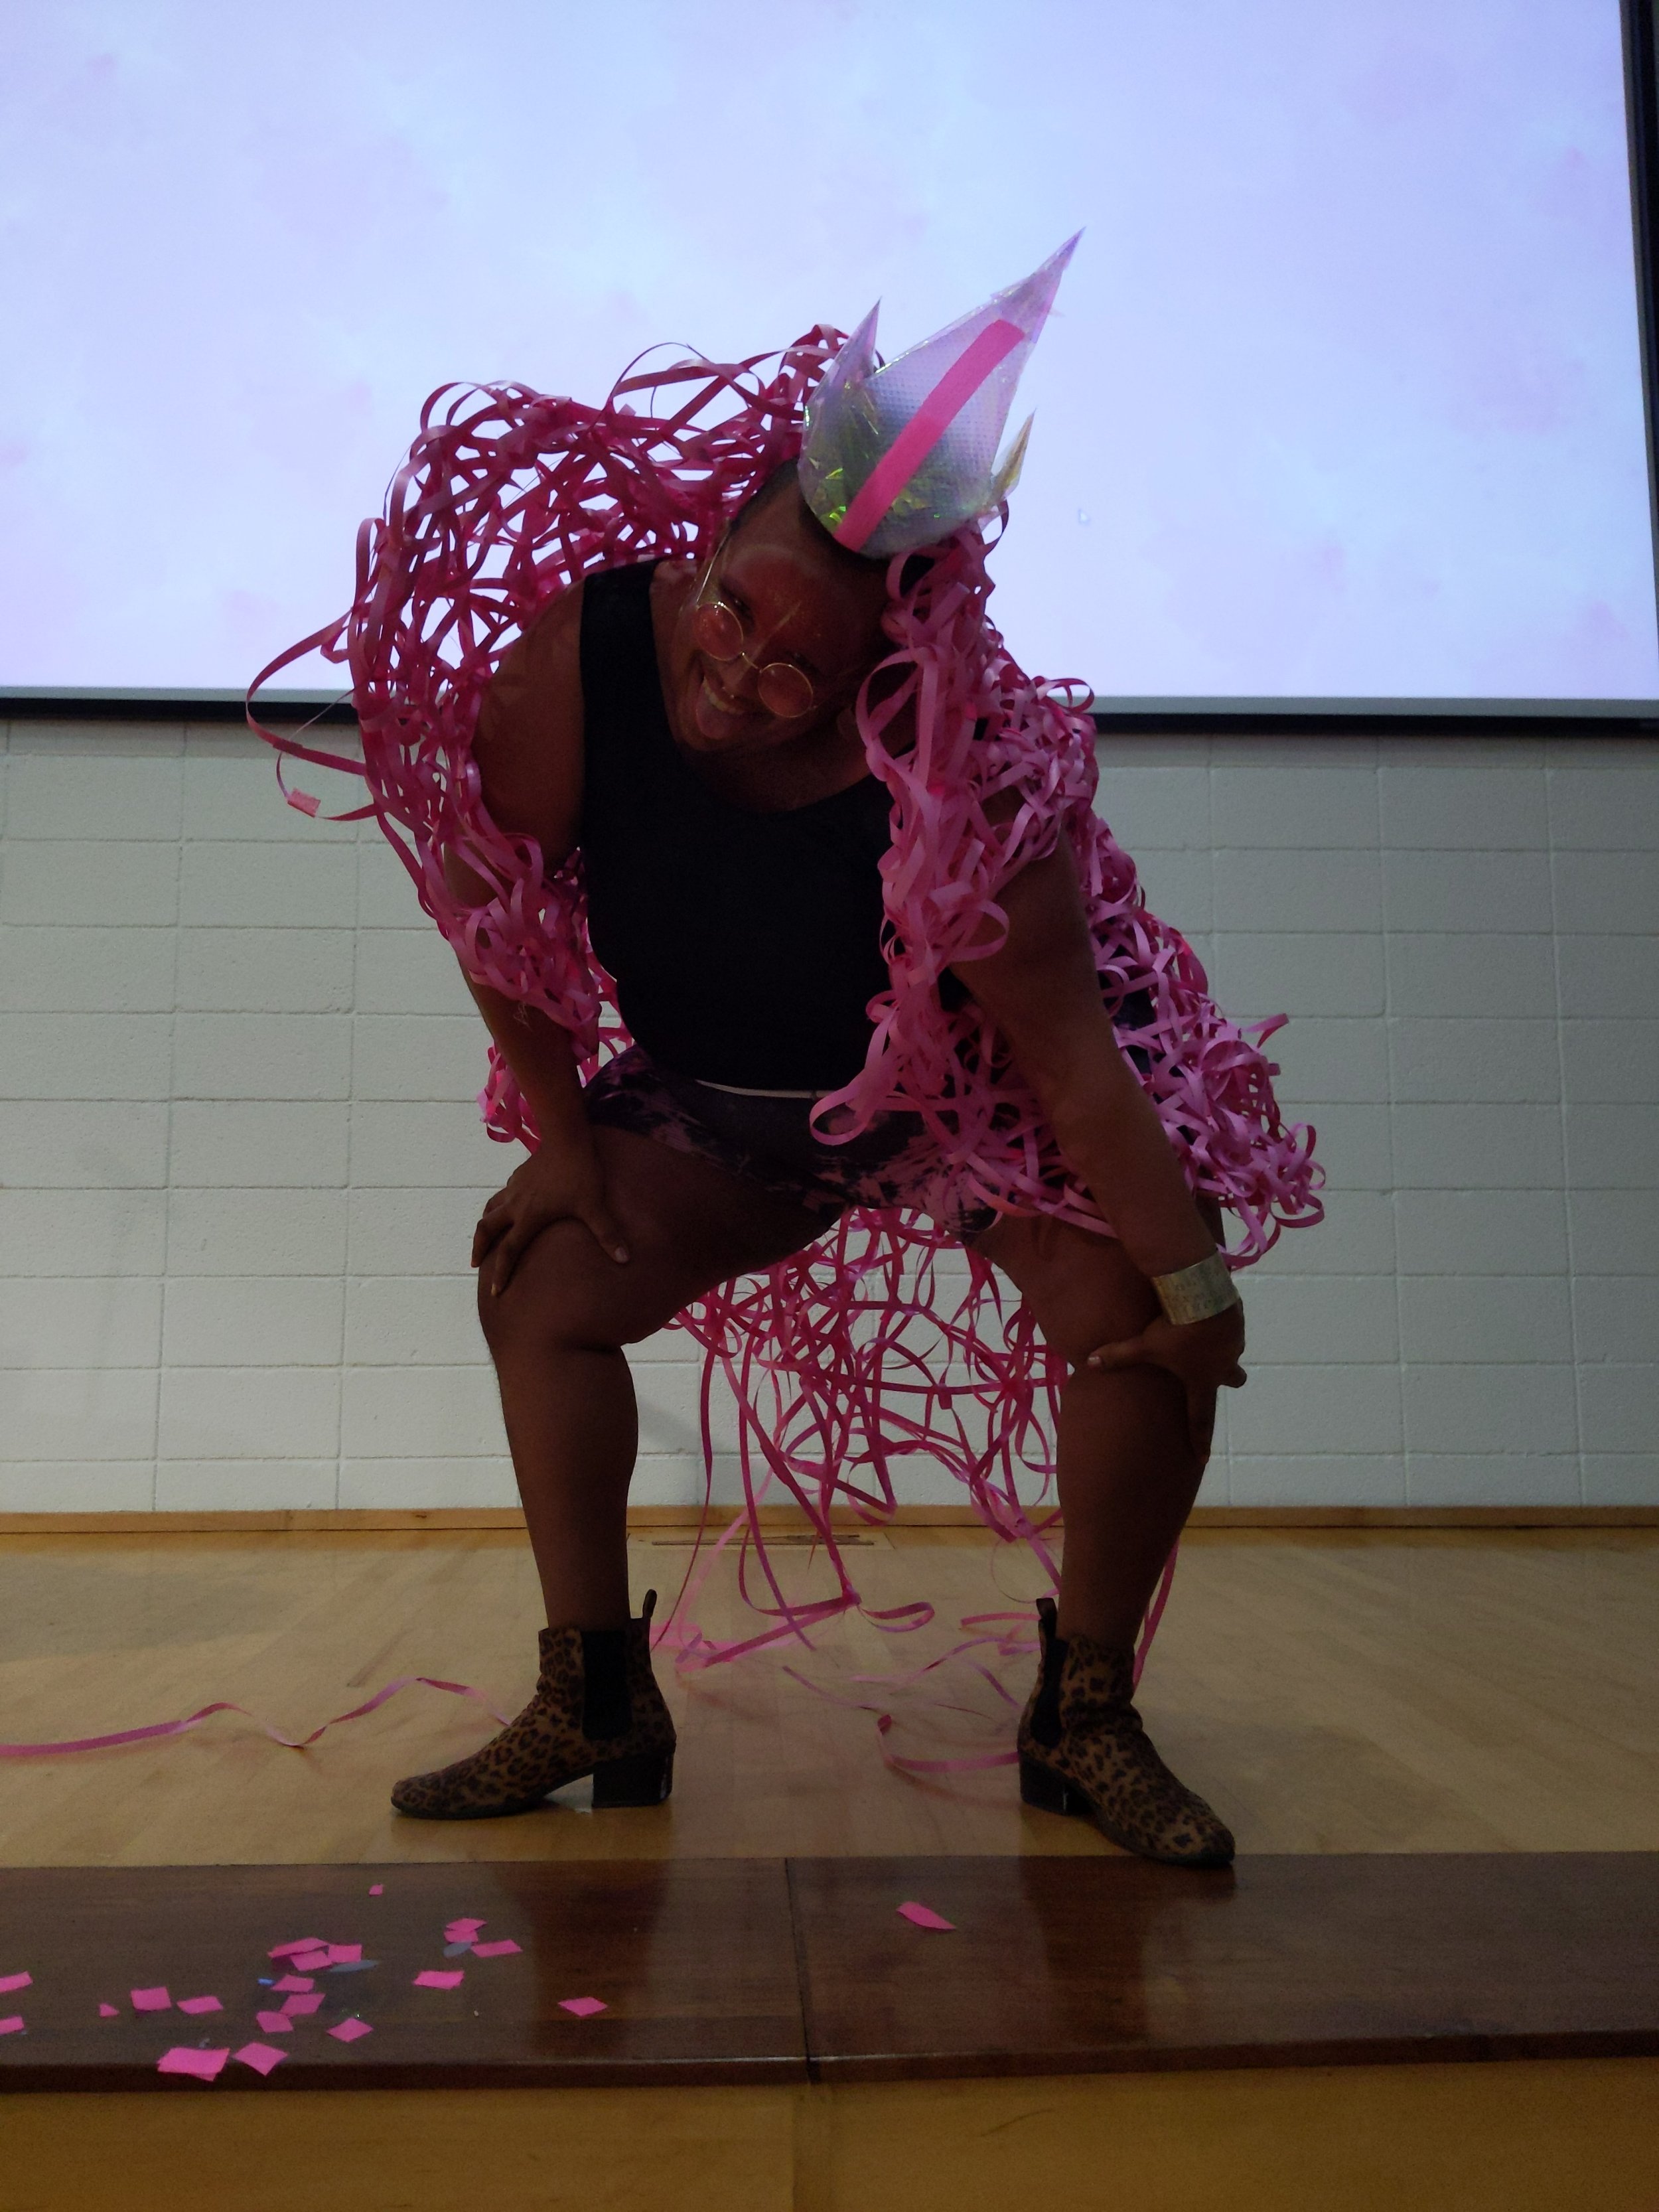   Pink Sugar Heart Attack   2022  Performance, sermon, and dance party   Collaboration with Ashton Ludden  